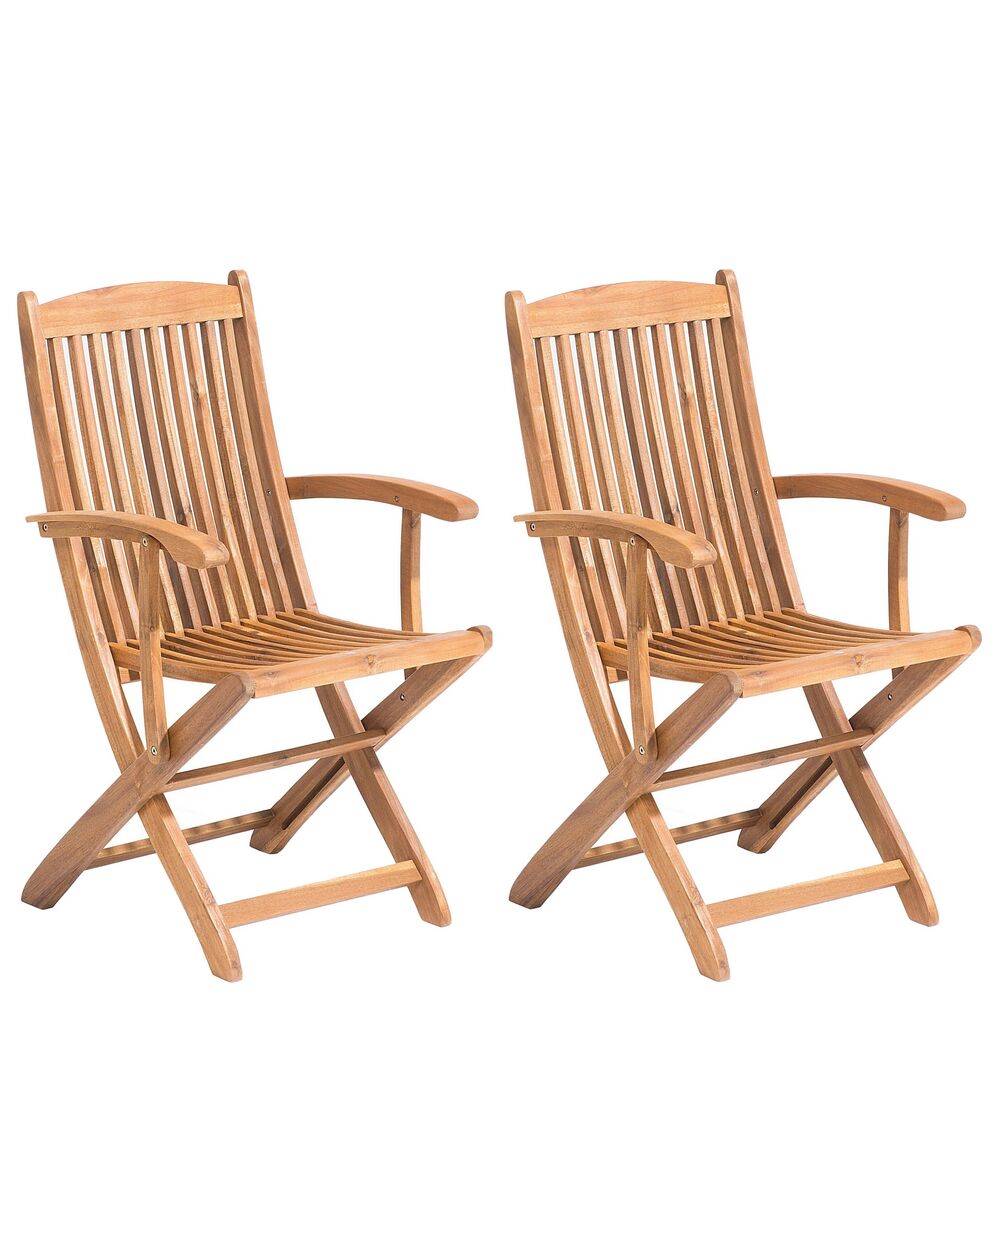 Set of 2 Garden Folding Chairs Light Wood MAUI - Furniture, lamps &  accessories up to 70% off | Avandeo online store